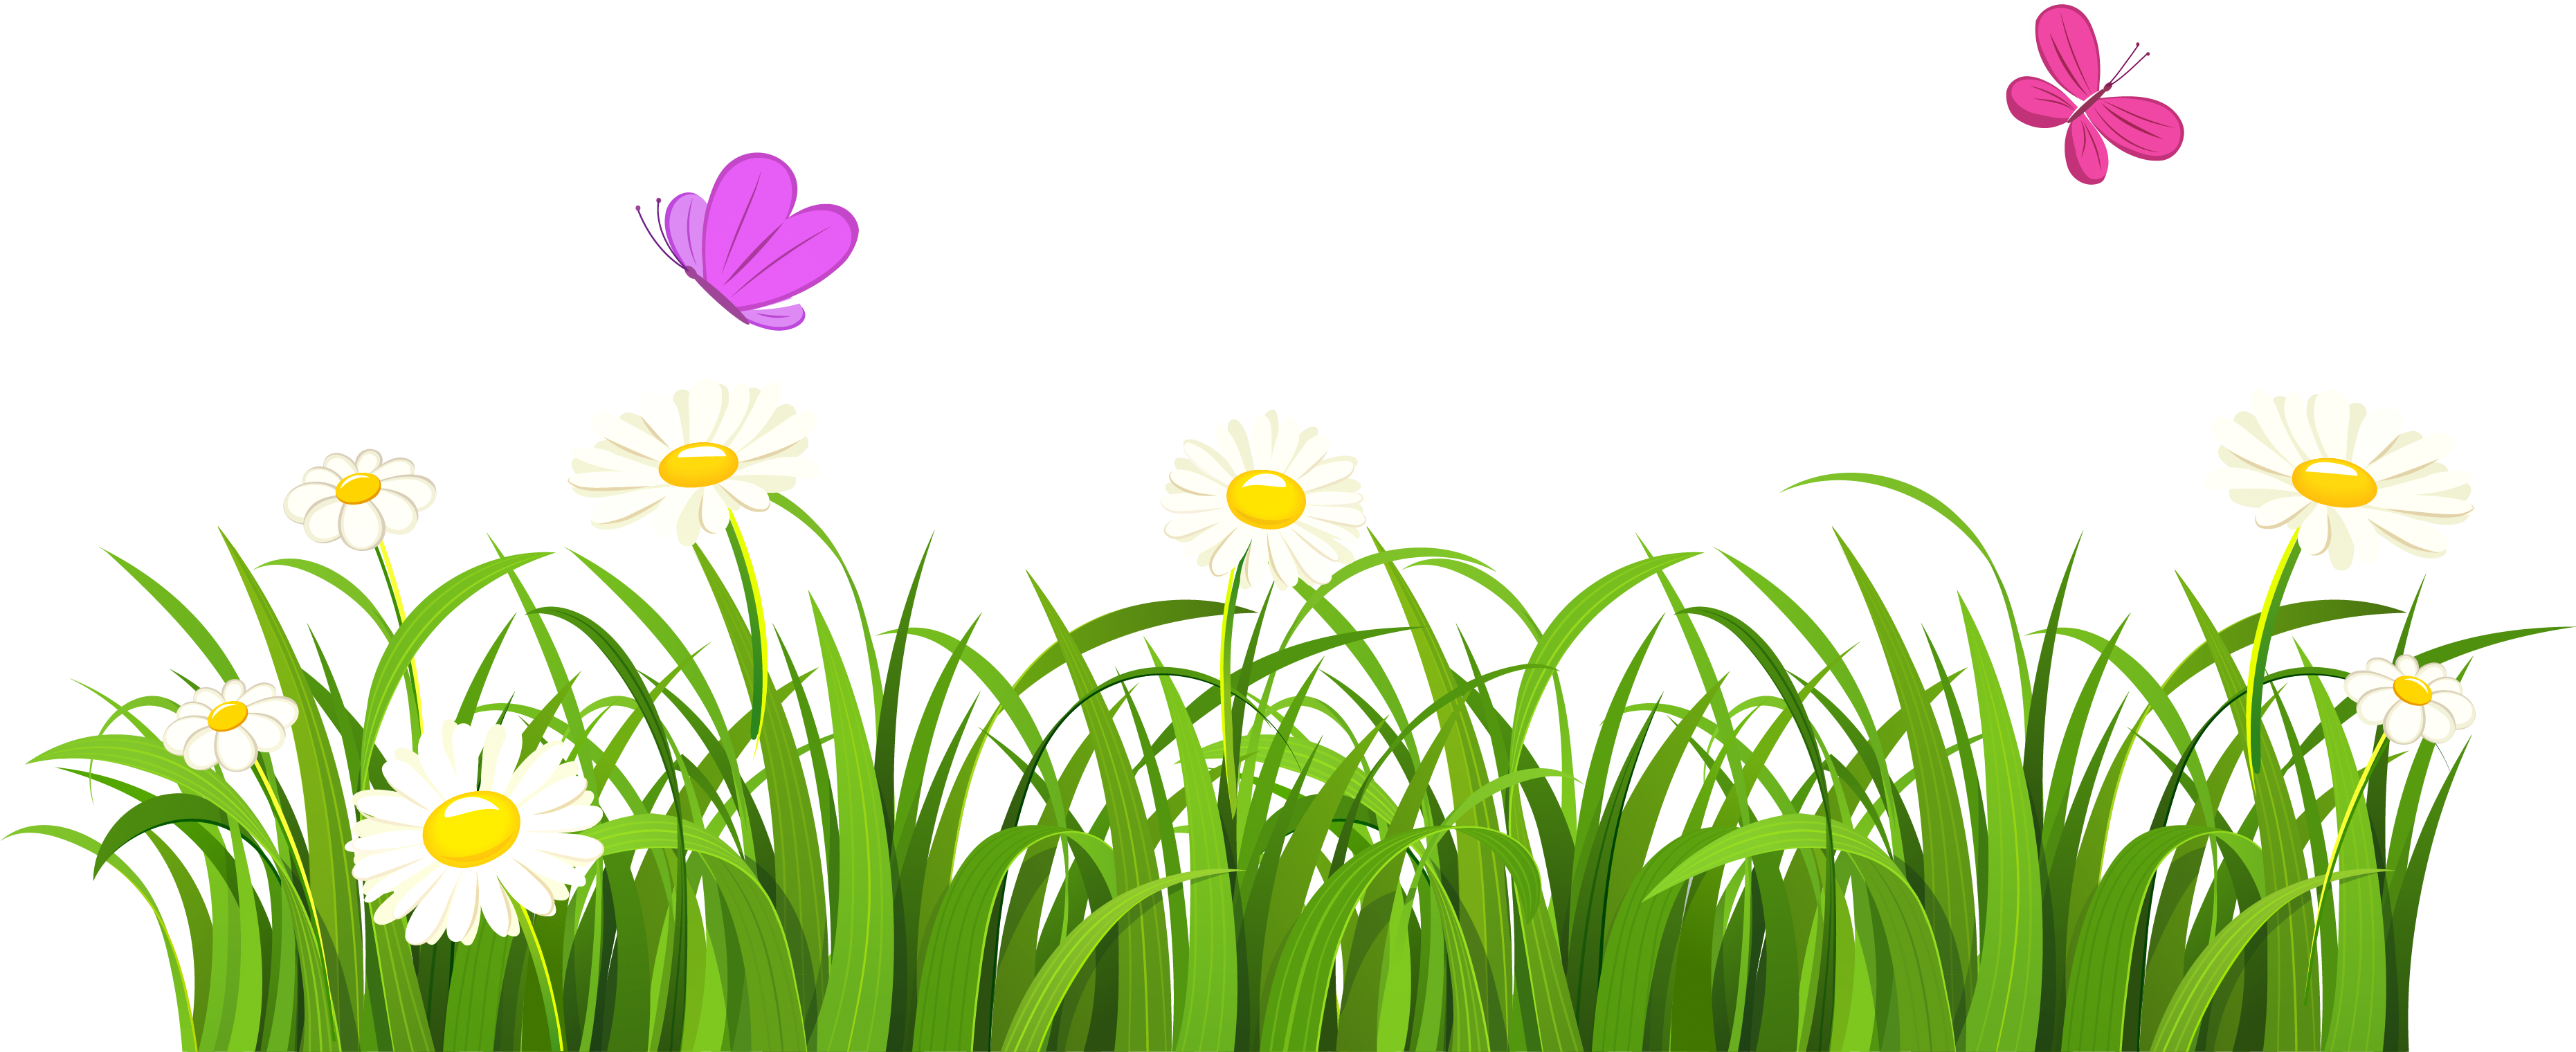 Grass Background Clipart Grass And Flowers Clipart